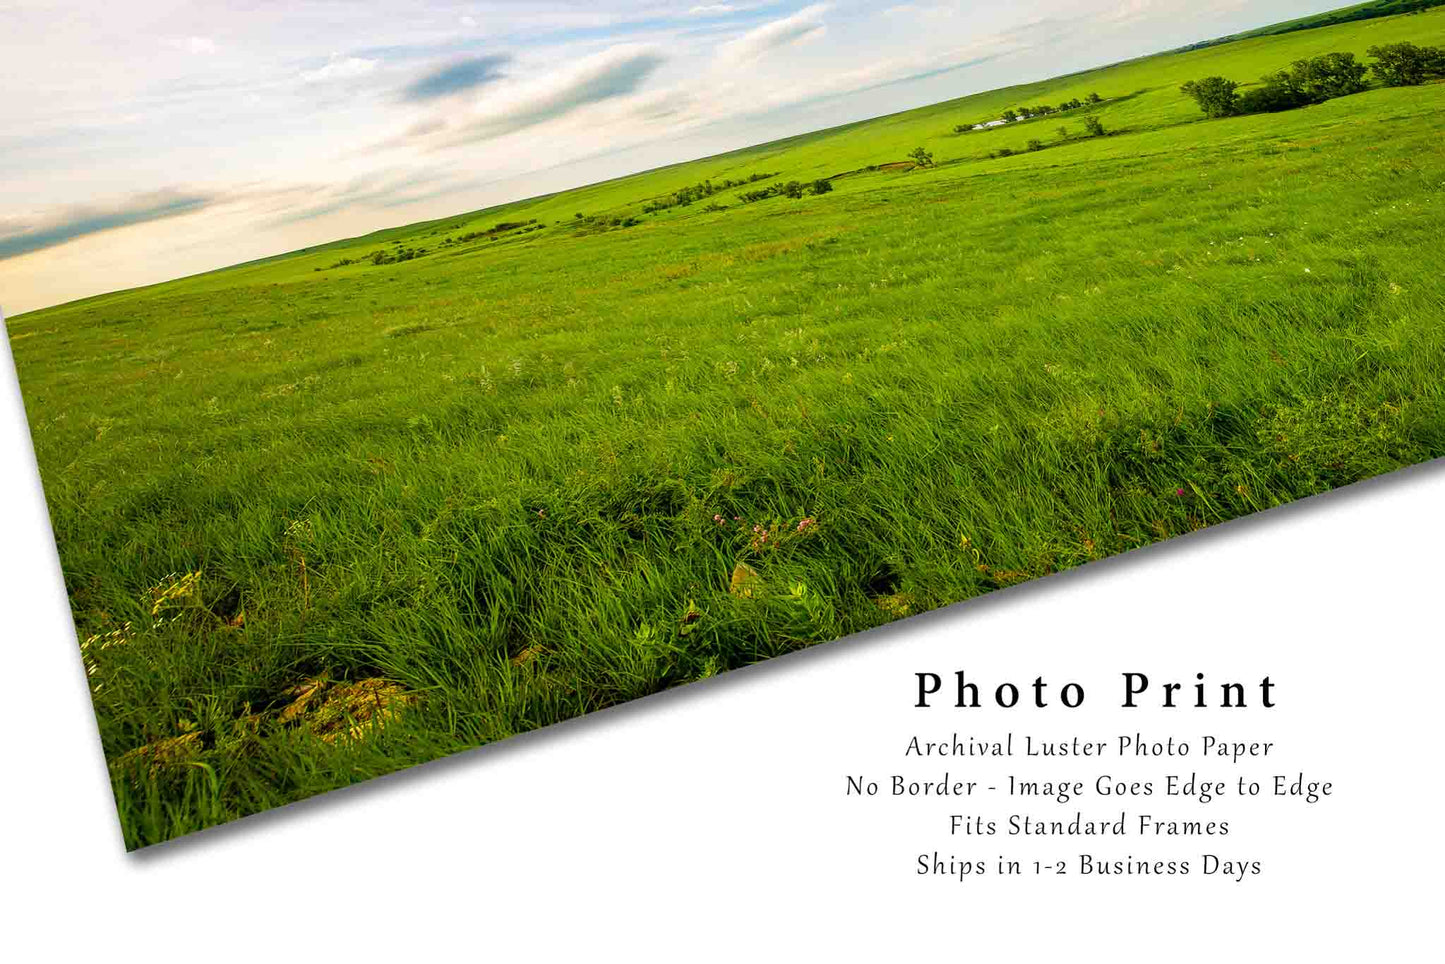 Flint Hills Landscape Photography Print - Picture of Tallgrass Prairie on Spring Day in Kansas - Great Plains Wall Art Photo Decor